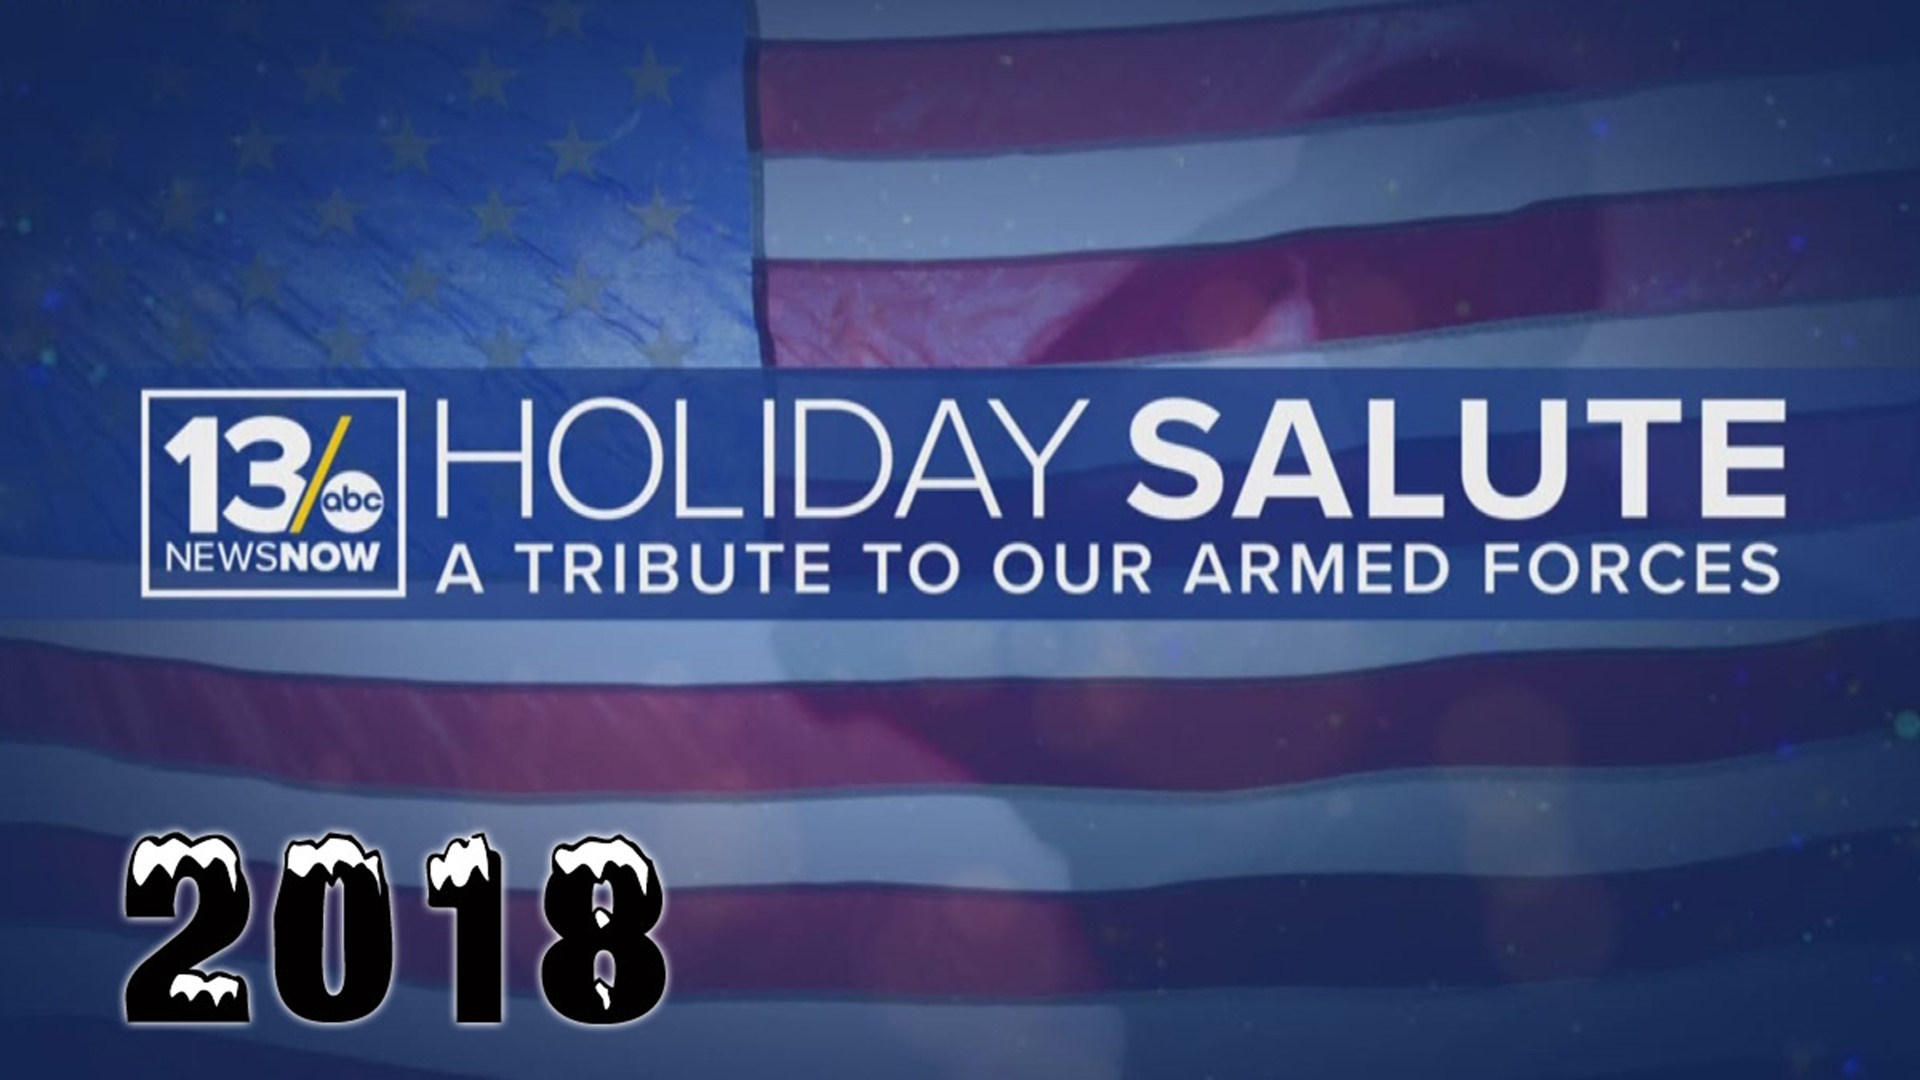 For more than 35 years, 13News Now has honored our military men & women with an annual holiday special. This is the 33rd annual Holiday Salute, which aired in 2018.